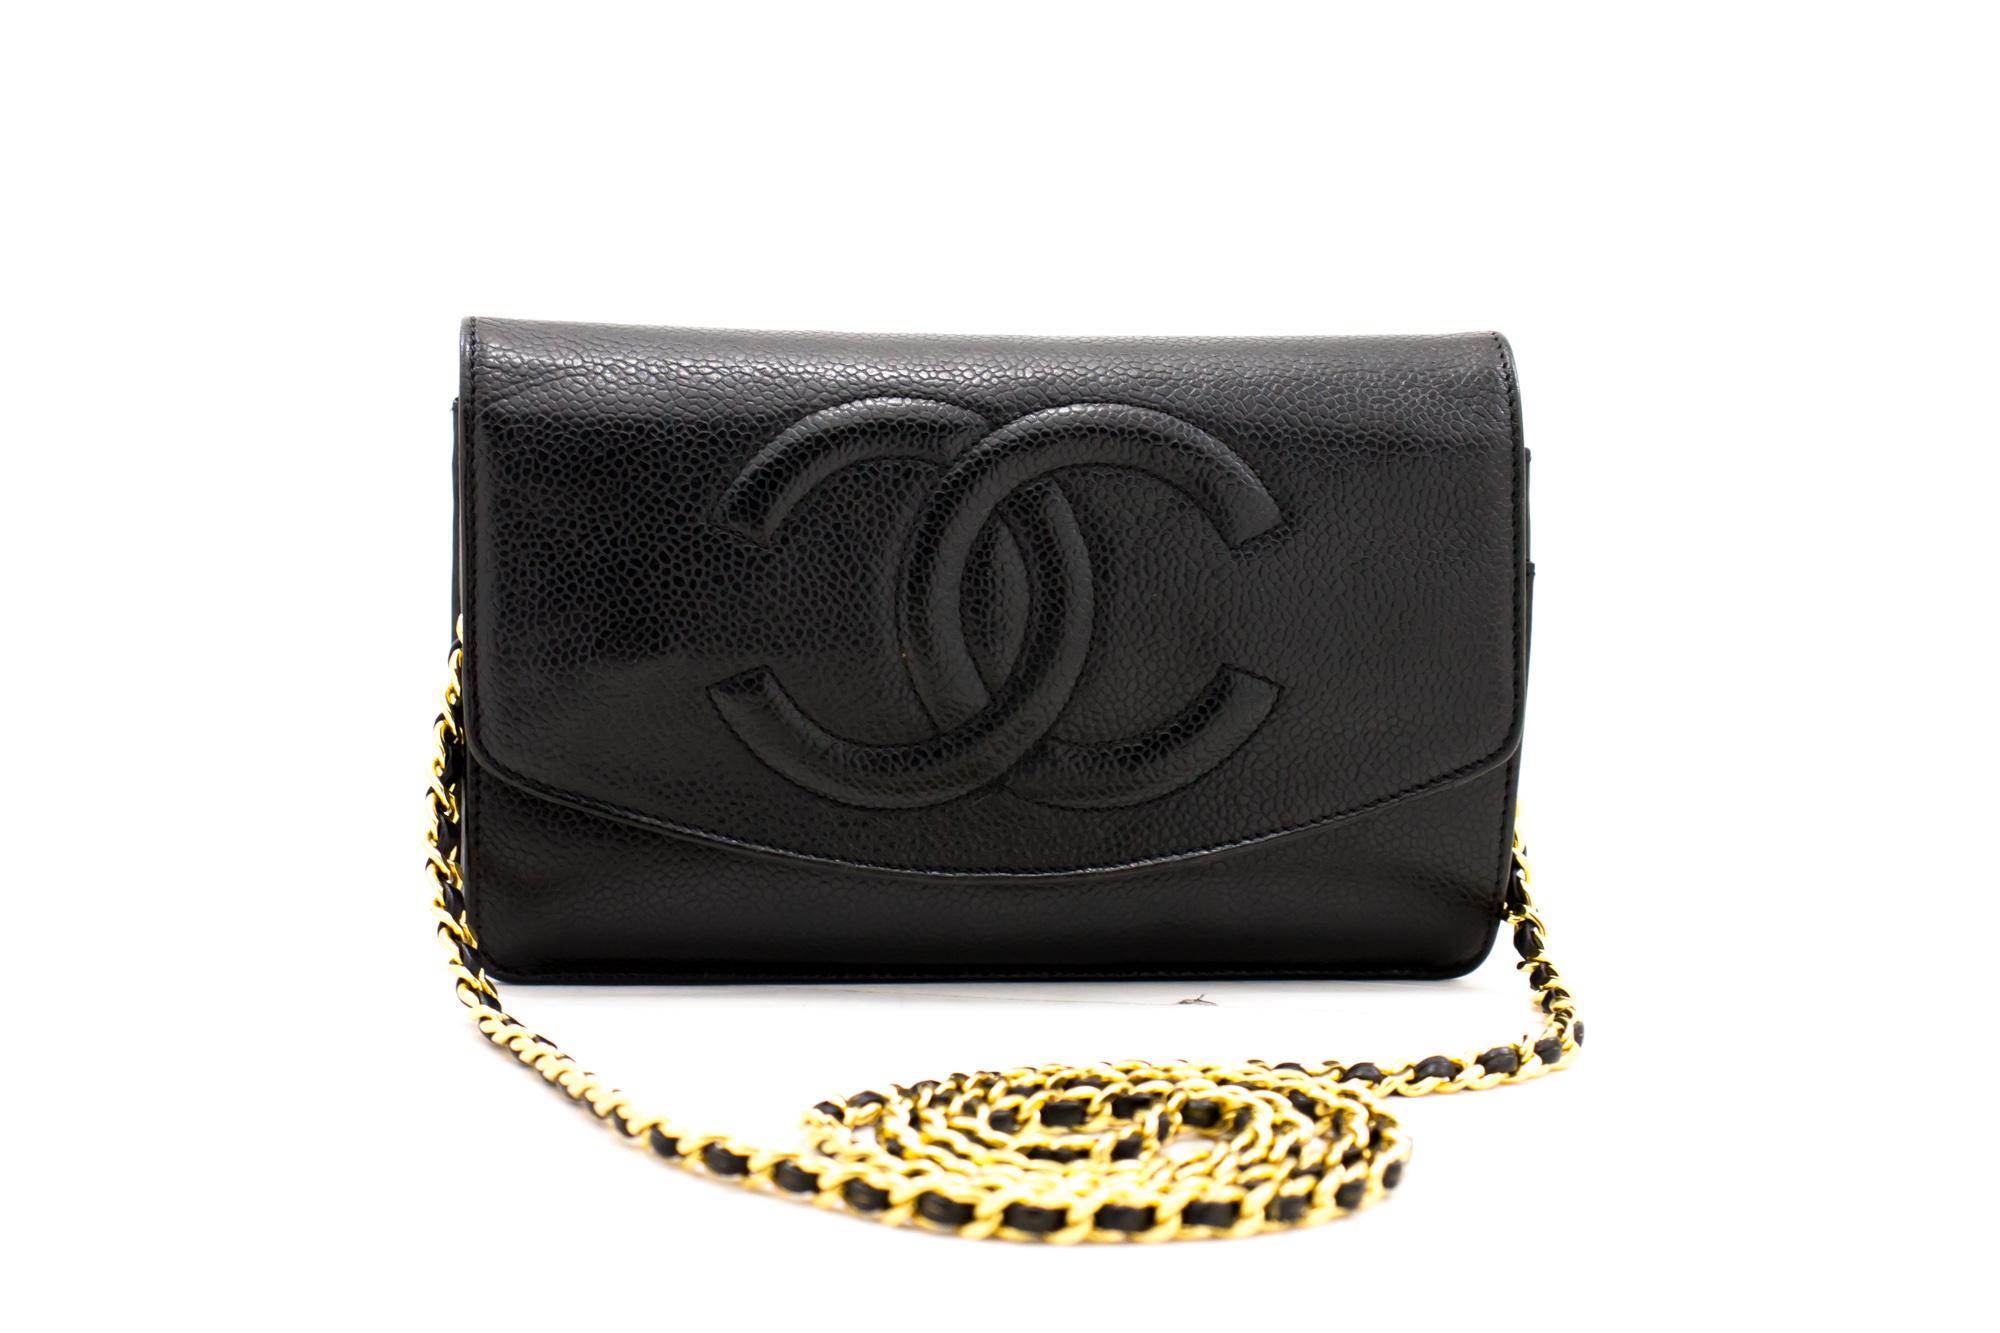 An authentic CHANEL Caviar Wallet On Chain WOC Black Shoulder Bag Crossbody. The color is Black. The outside material is Leather. The pattern is Solid. This item is Vintage / Classic. The year of manufacture would be 1996-1997.
Conditions &